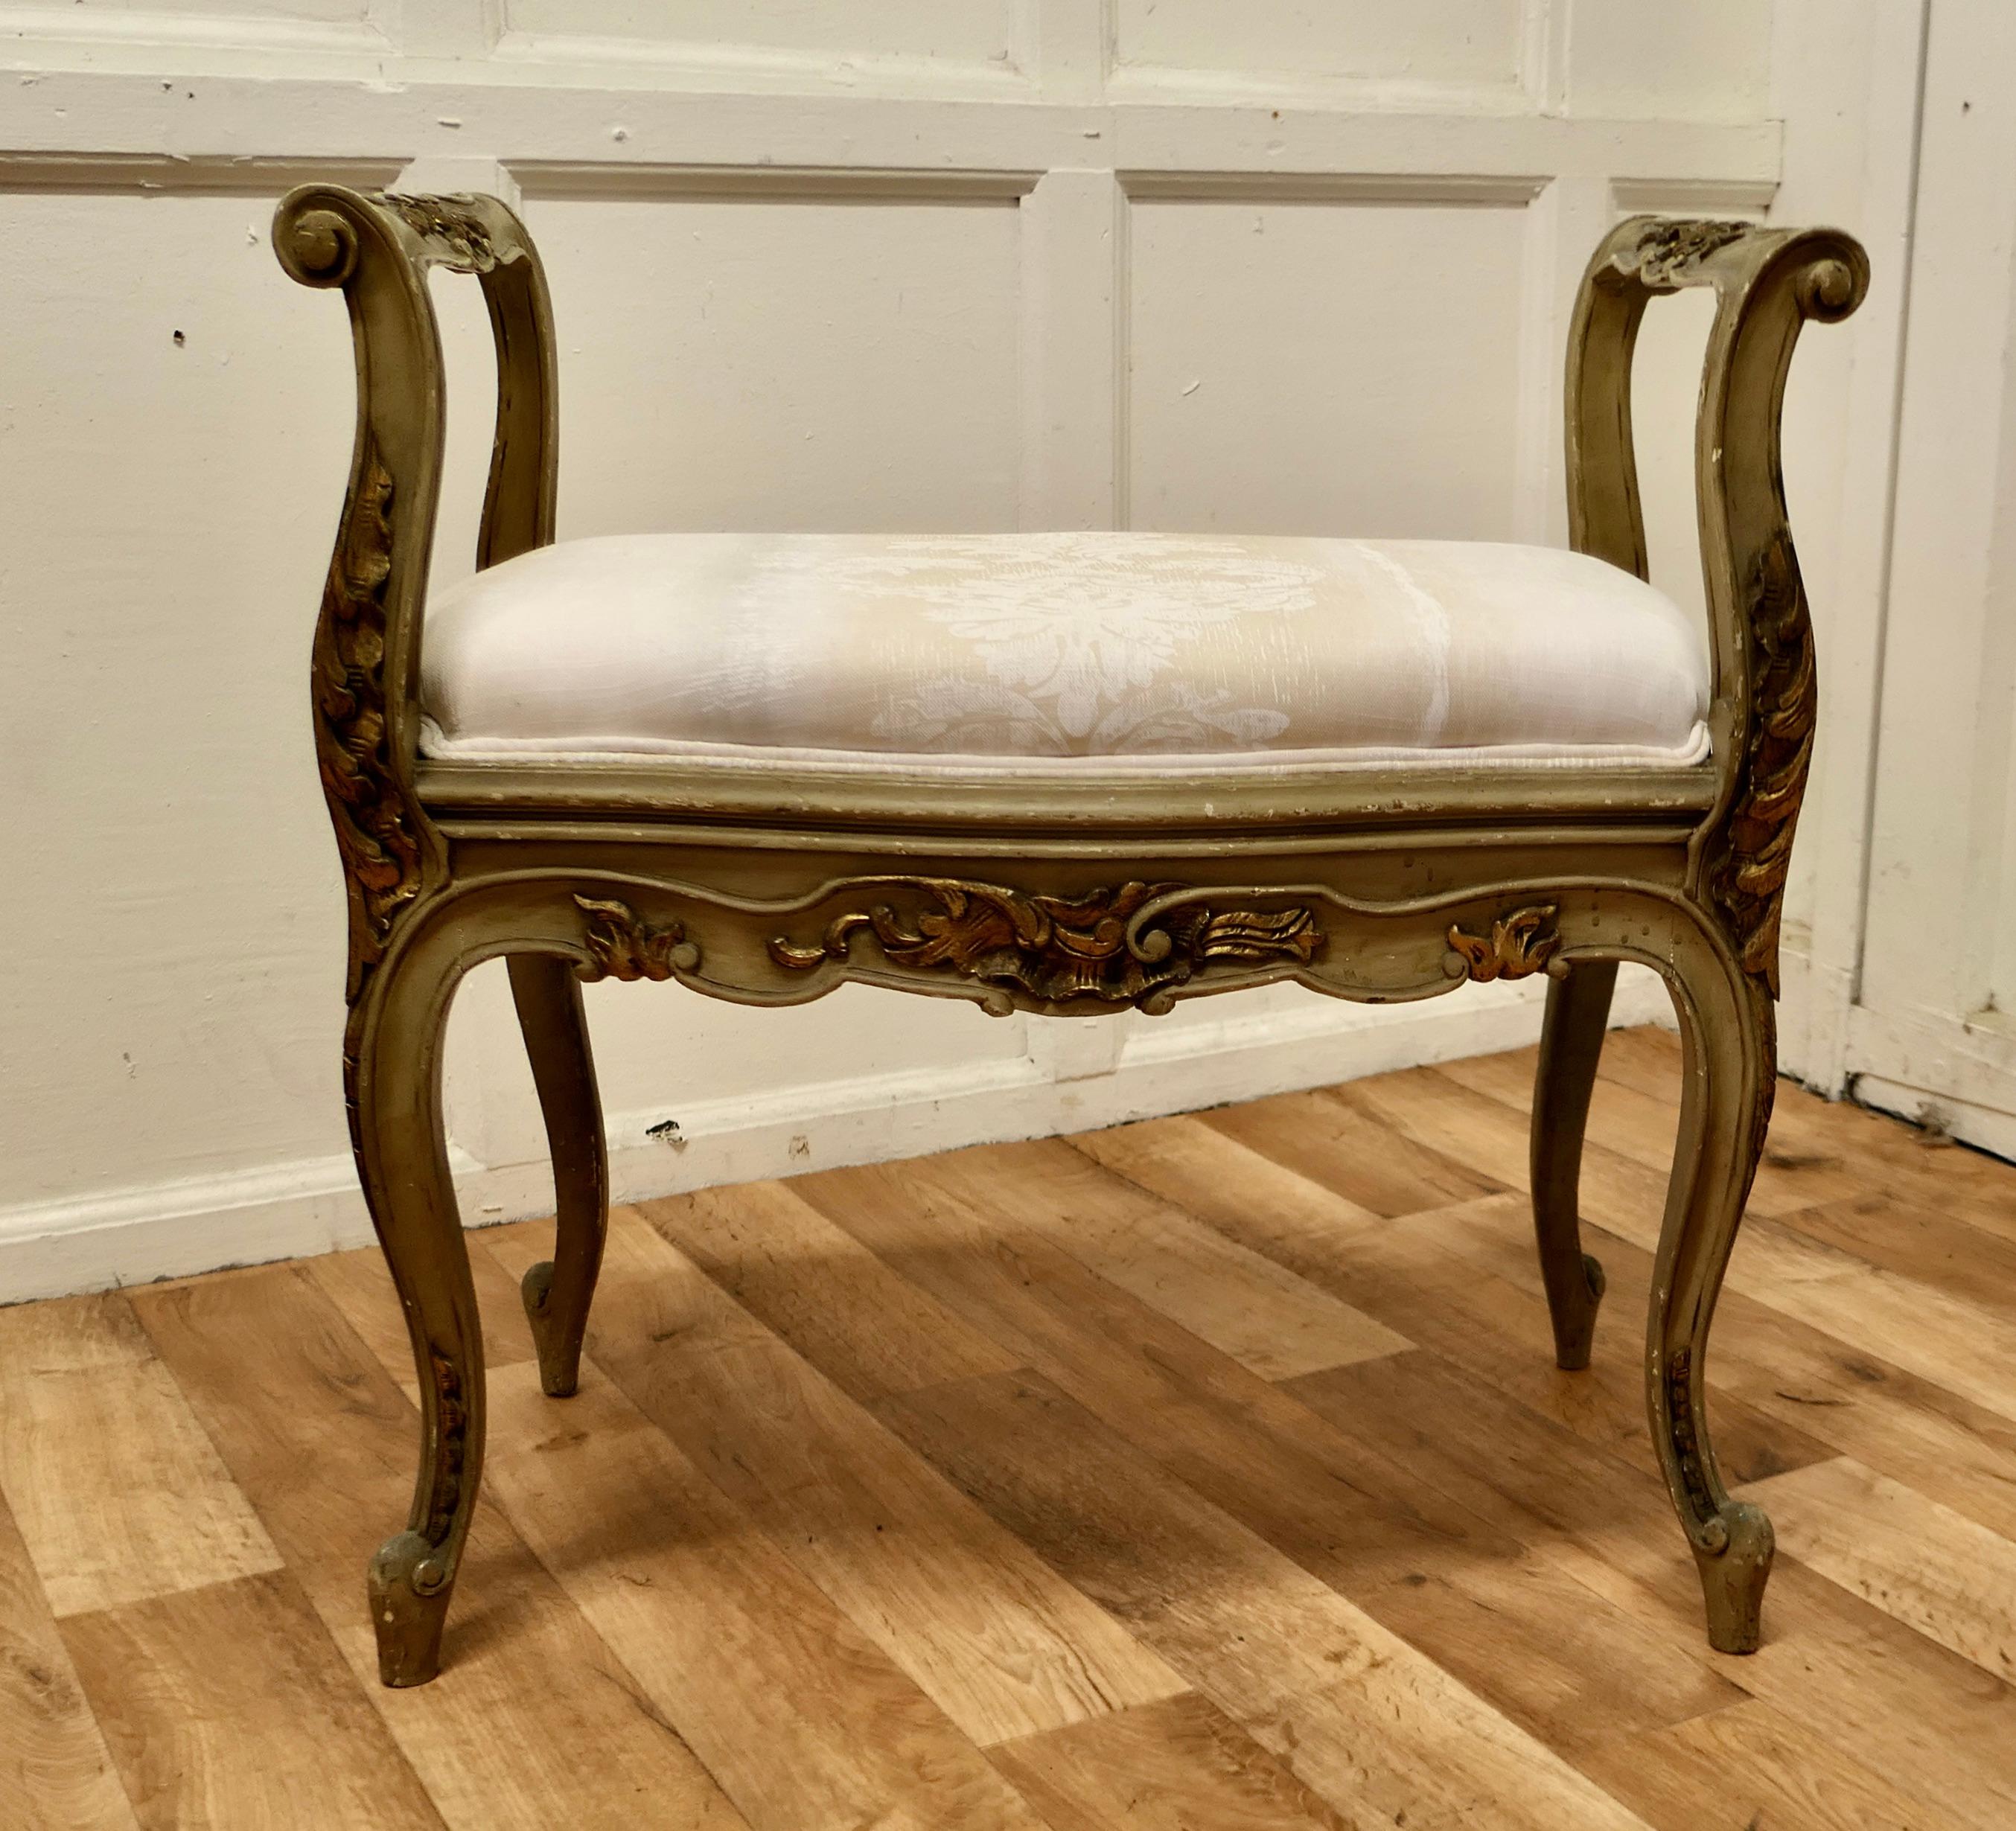 Original painted French Louis Philippe Boudoir window seat

This is a delightful Piece of Louis Philippe furniture, it has high scroll arms on either end with turned rails and it is set on cabriole legs and is shaped at the front and back
The